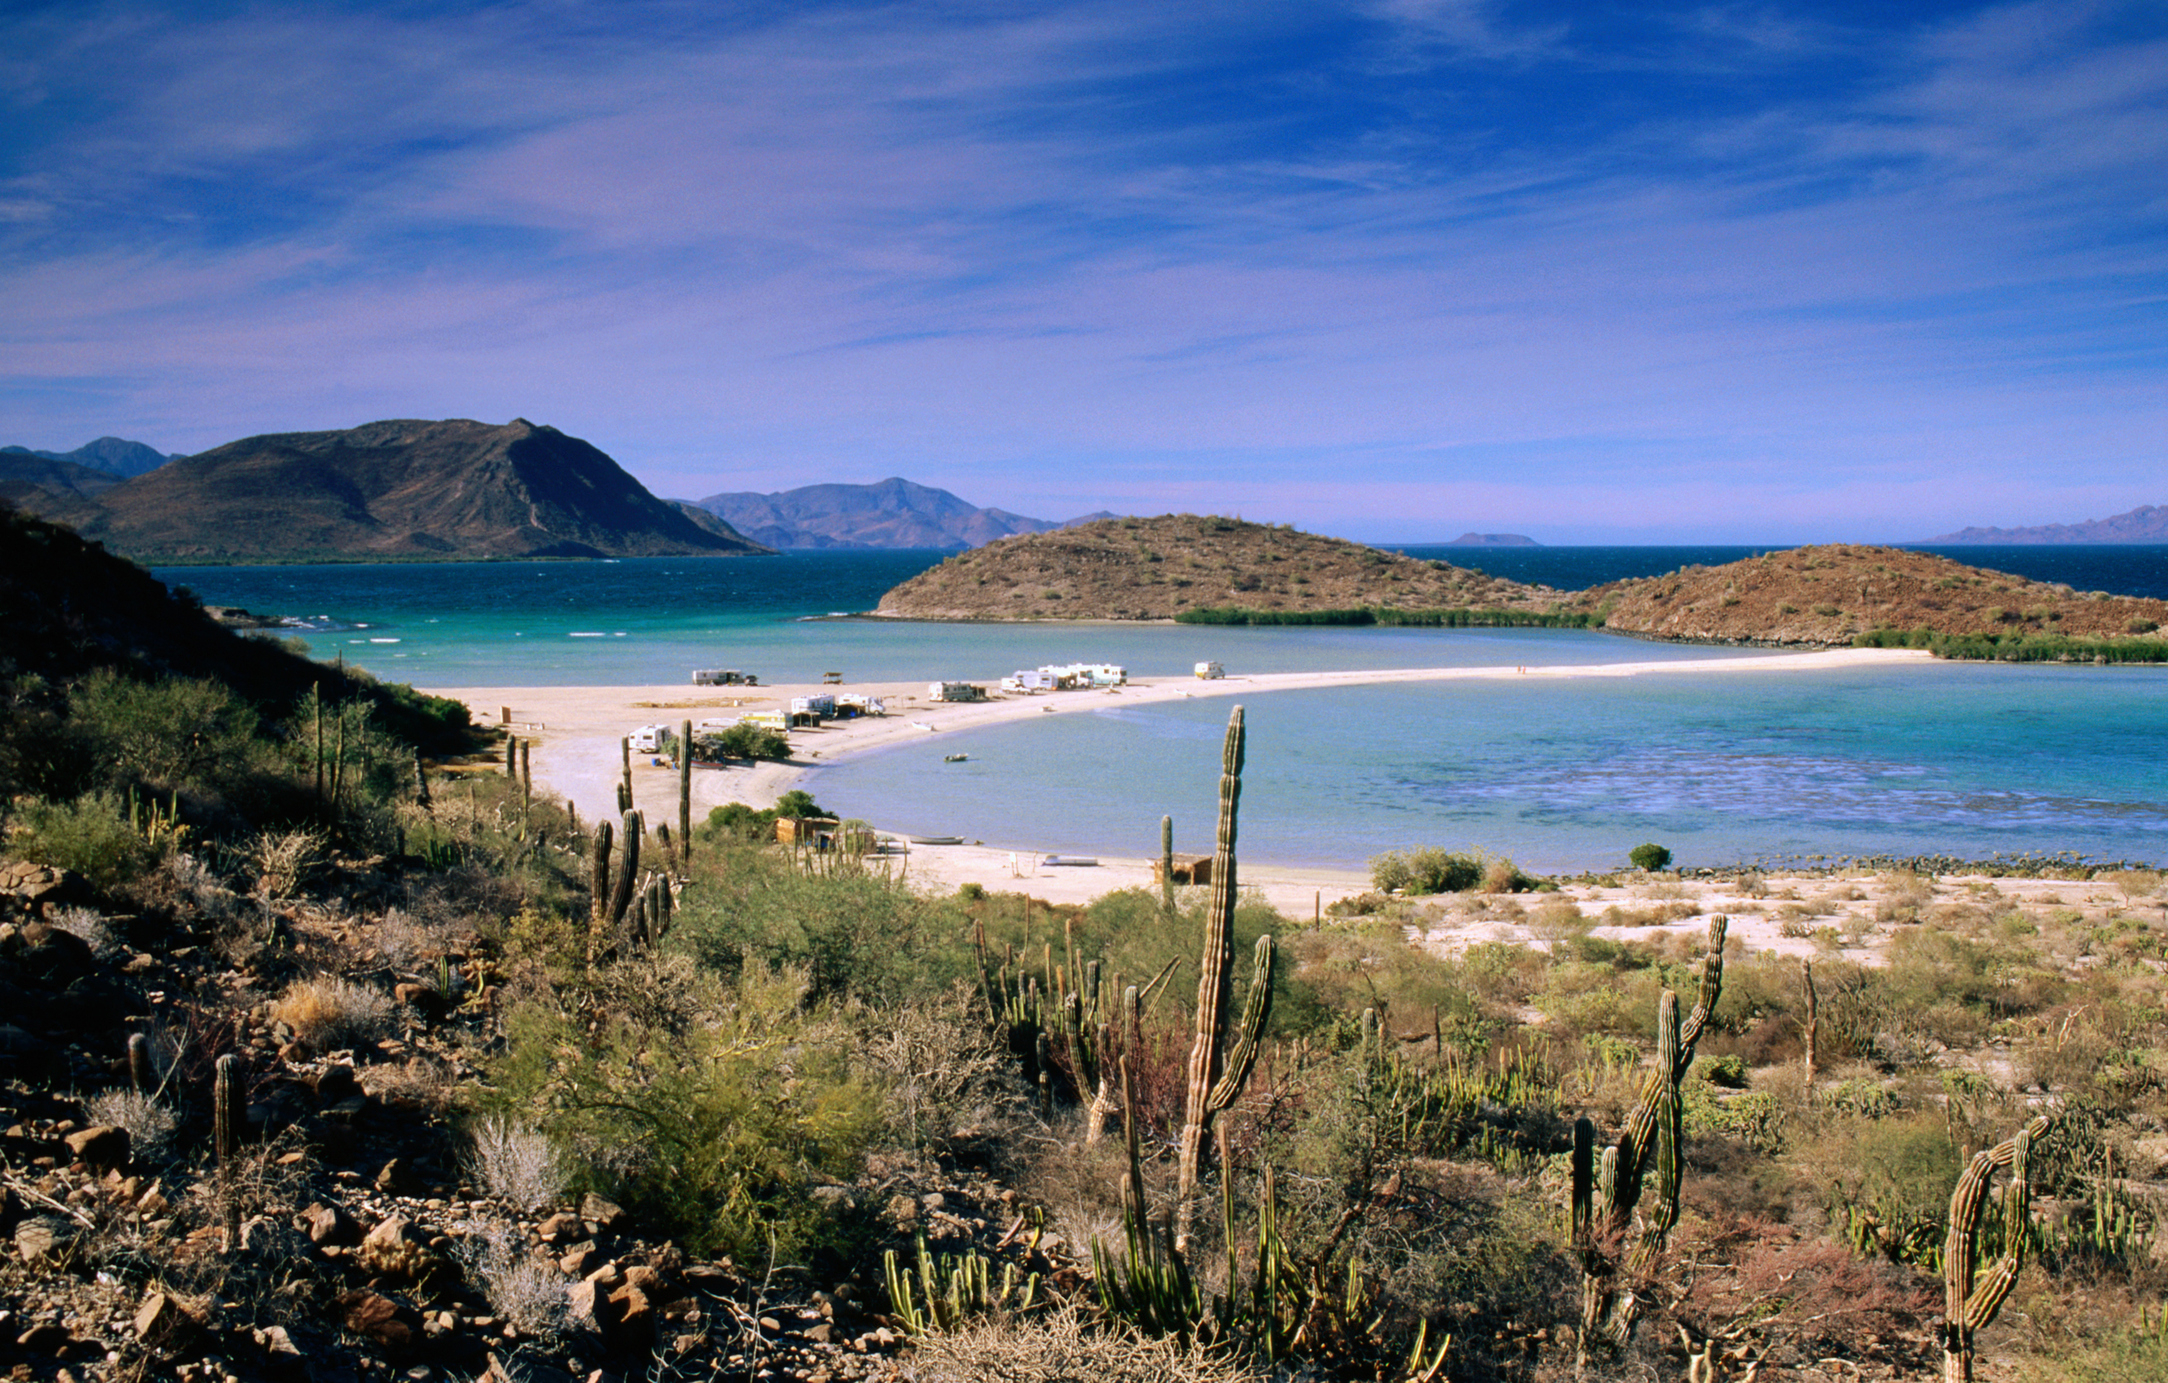 Scenic view of a coastal landscape with cacti in the foreground and a beach with boats in the distance